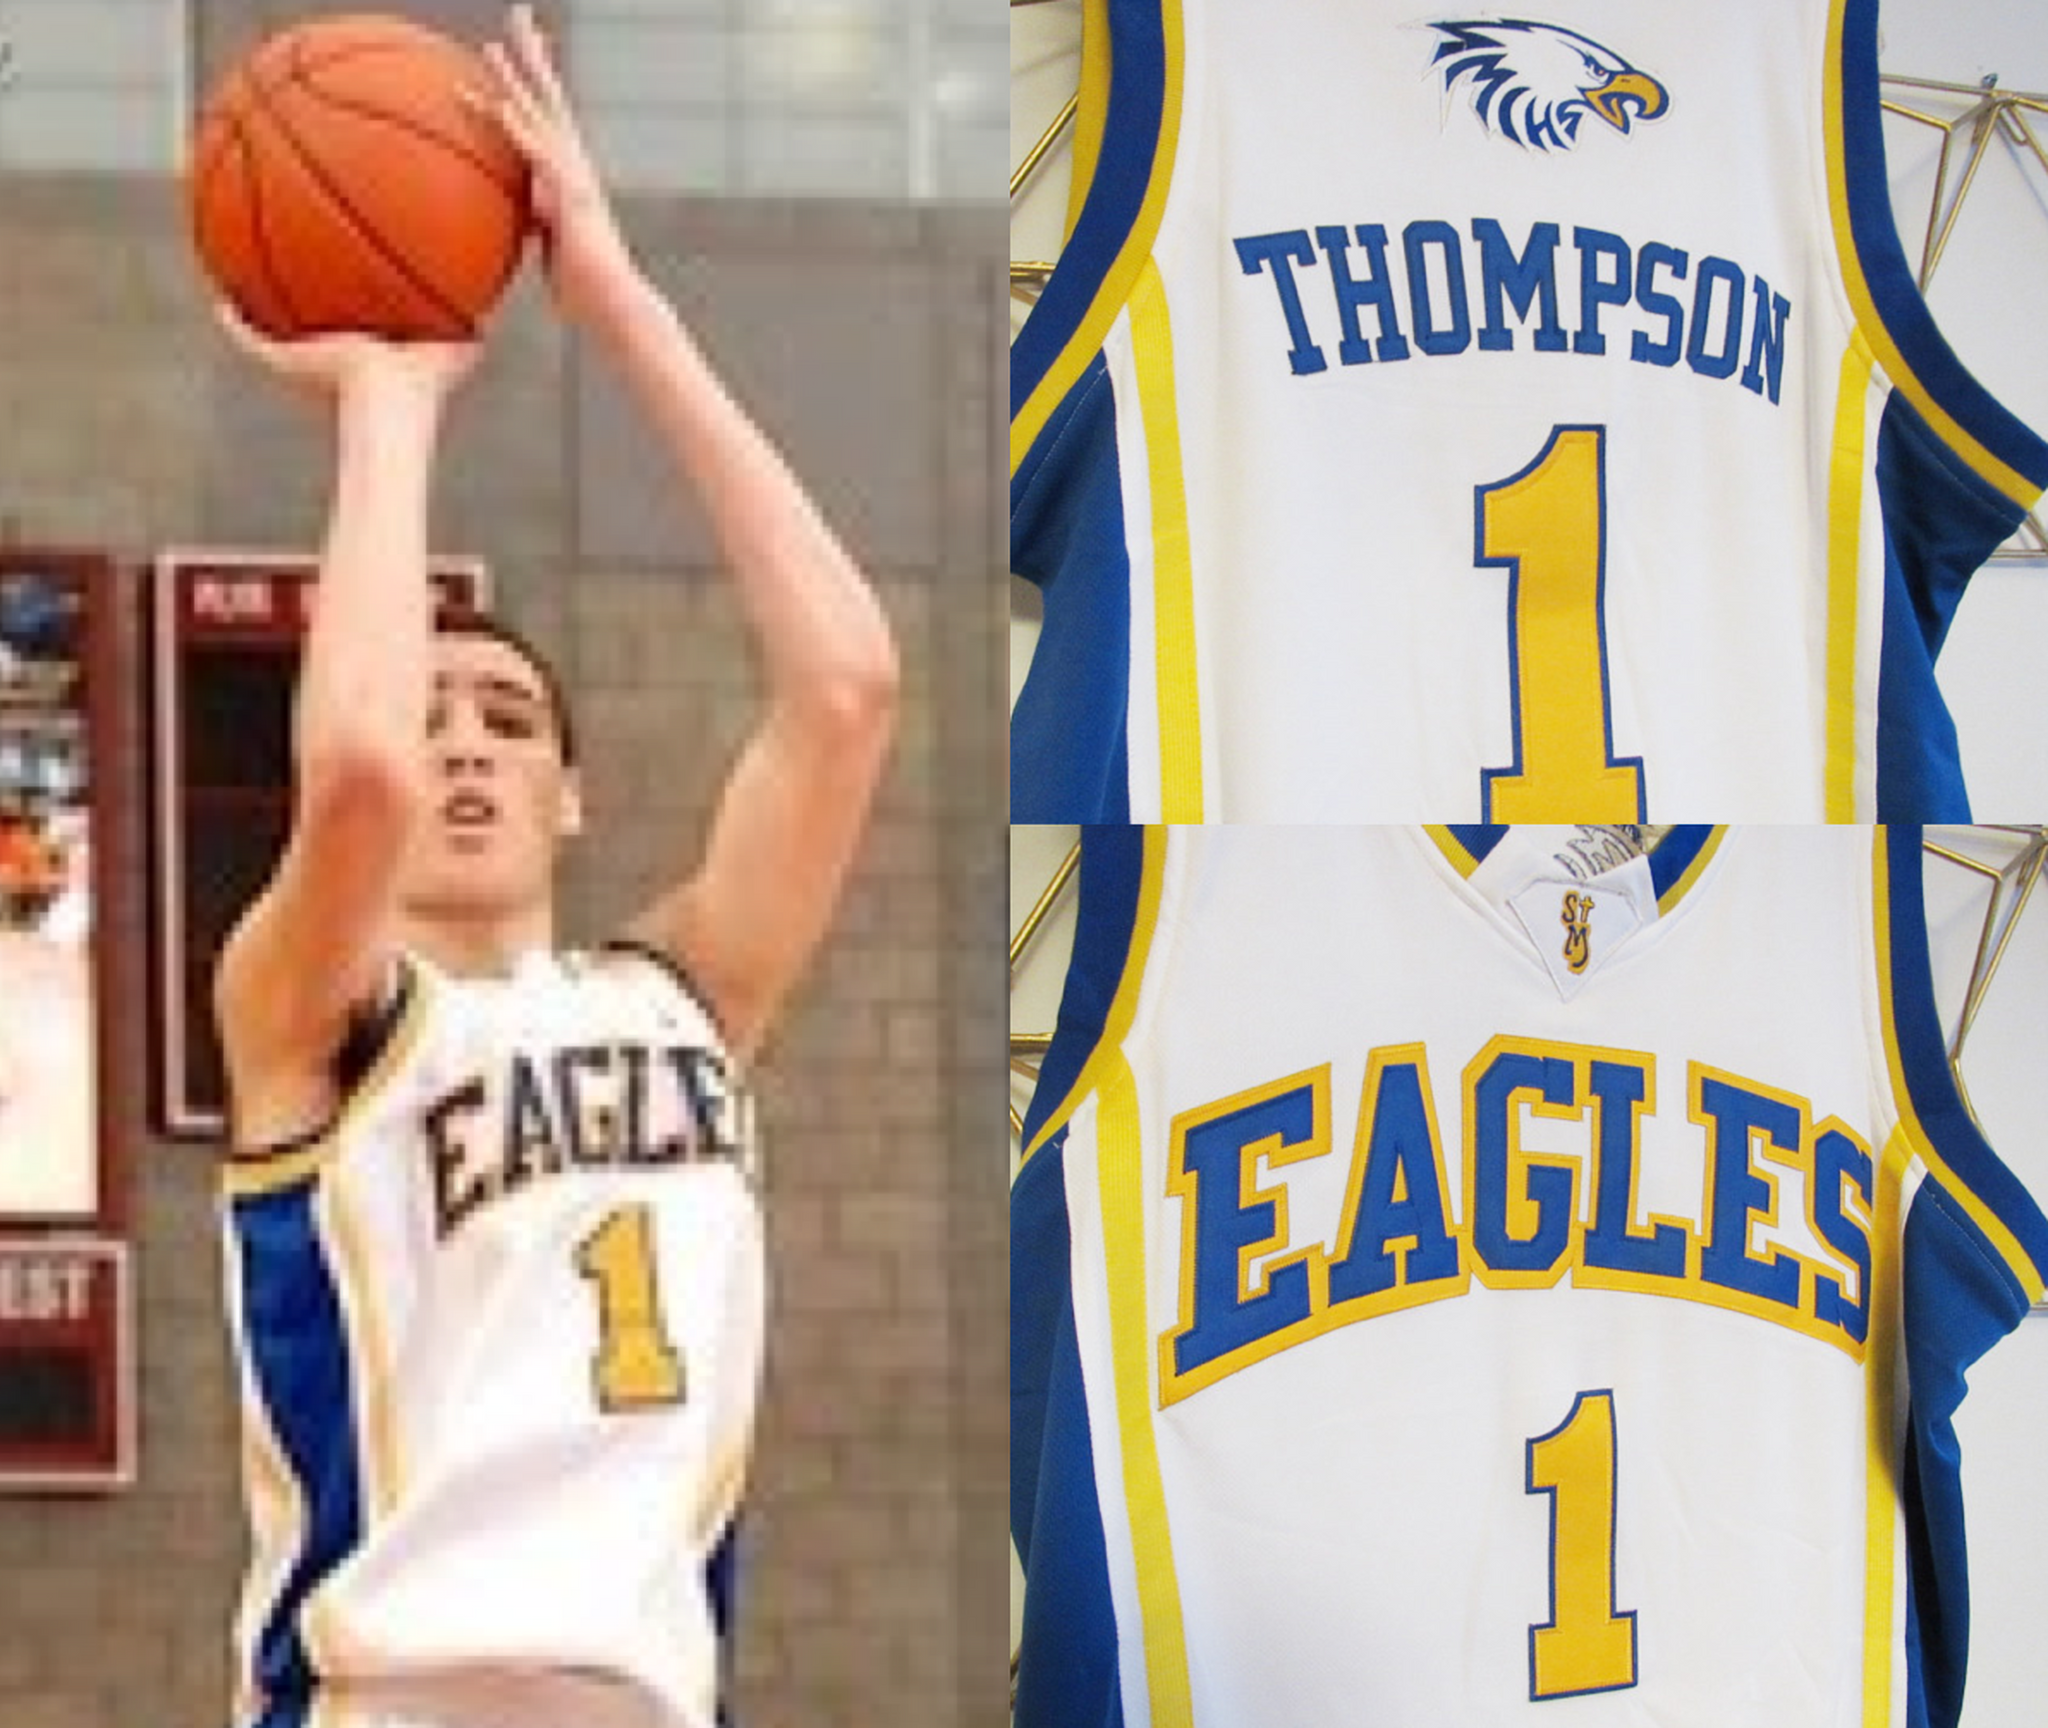 klay thompson home jersey